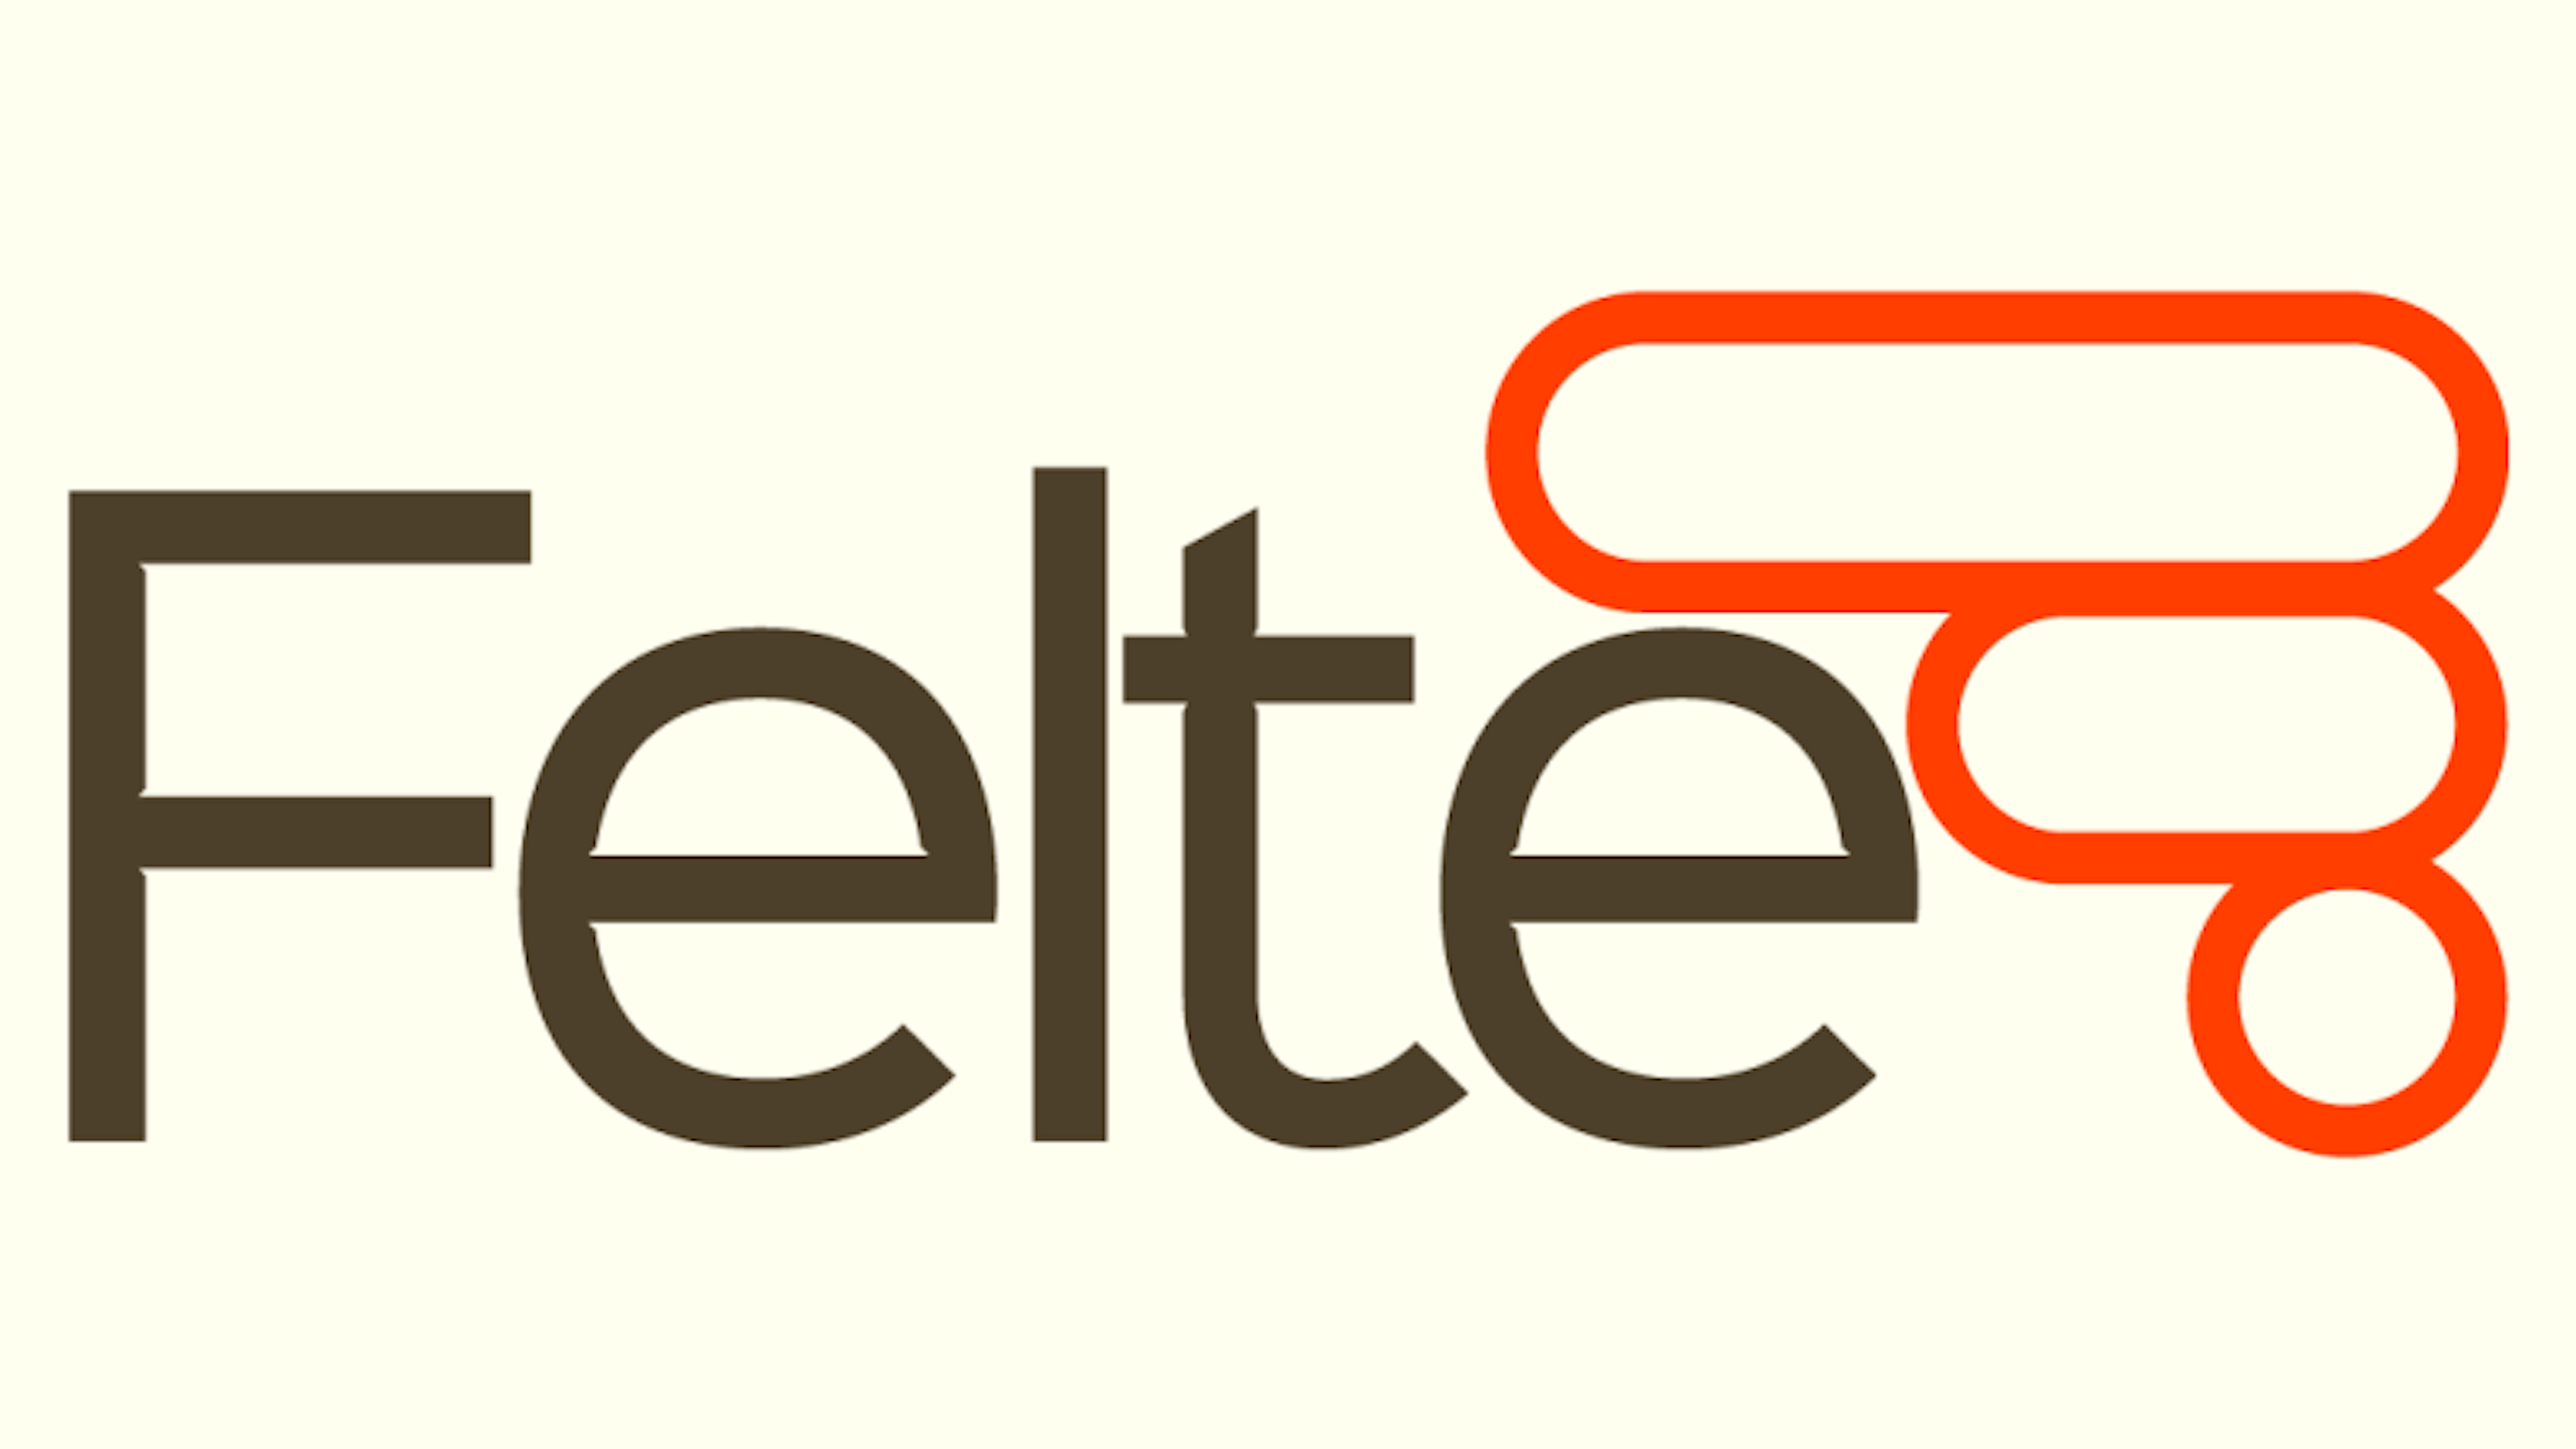 Felte: An extensible form library for Svelte